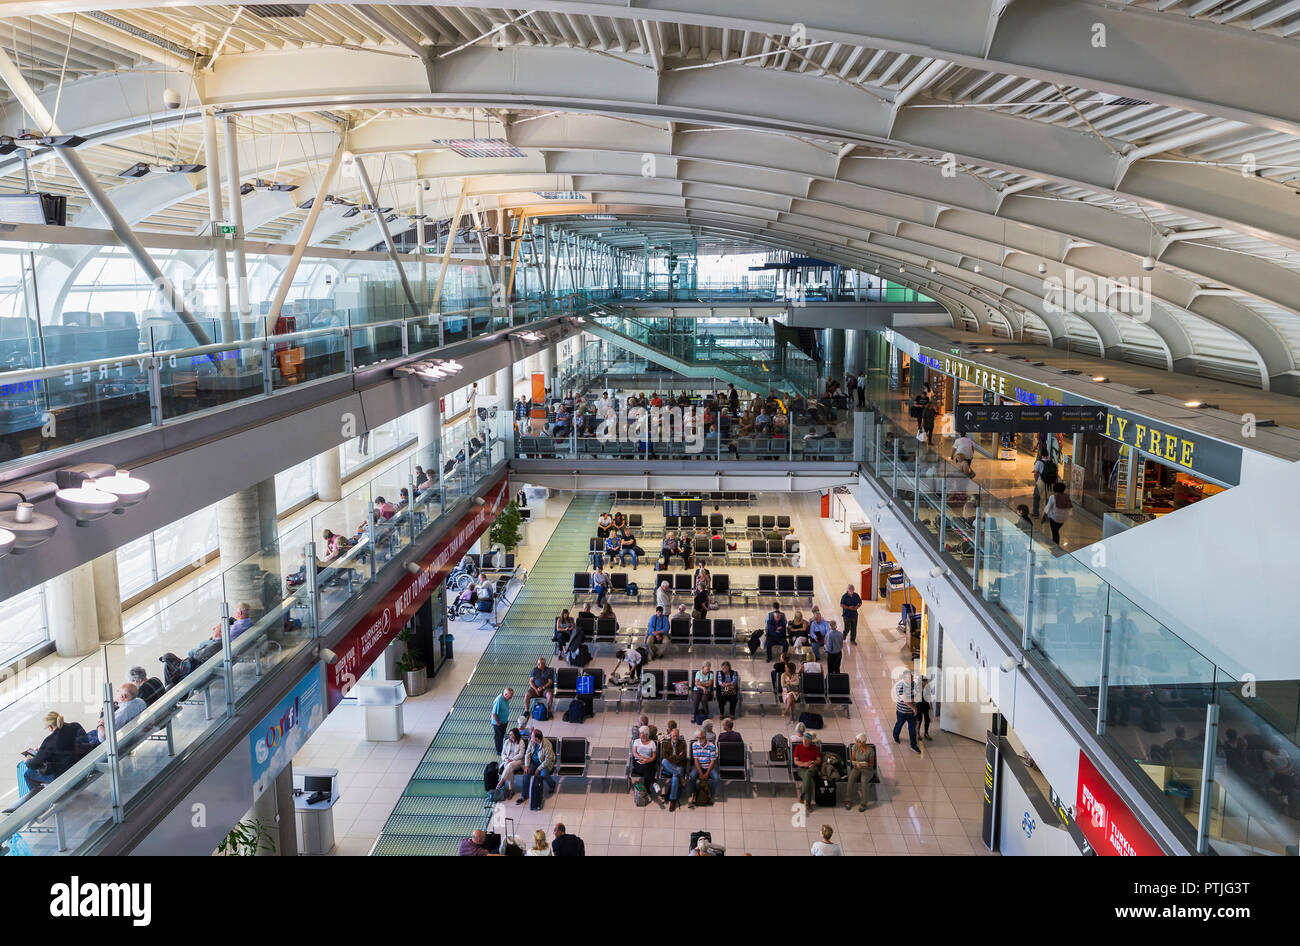 Inside the terminal of Dubrovnik airport. Stock Photo